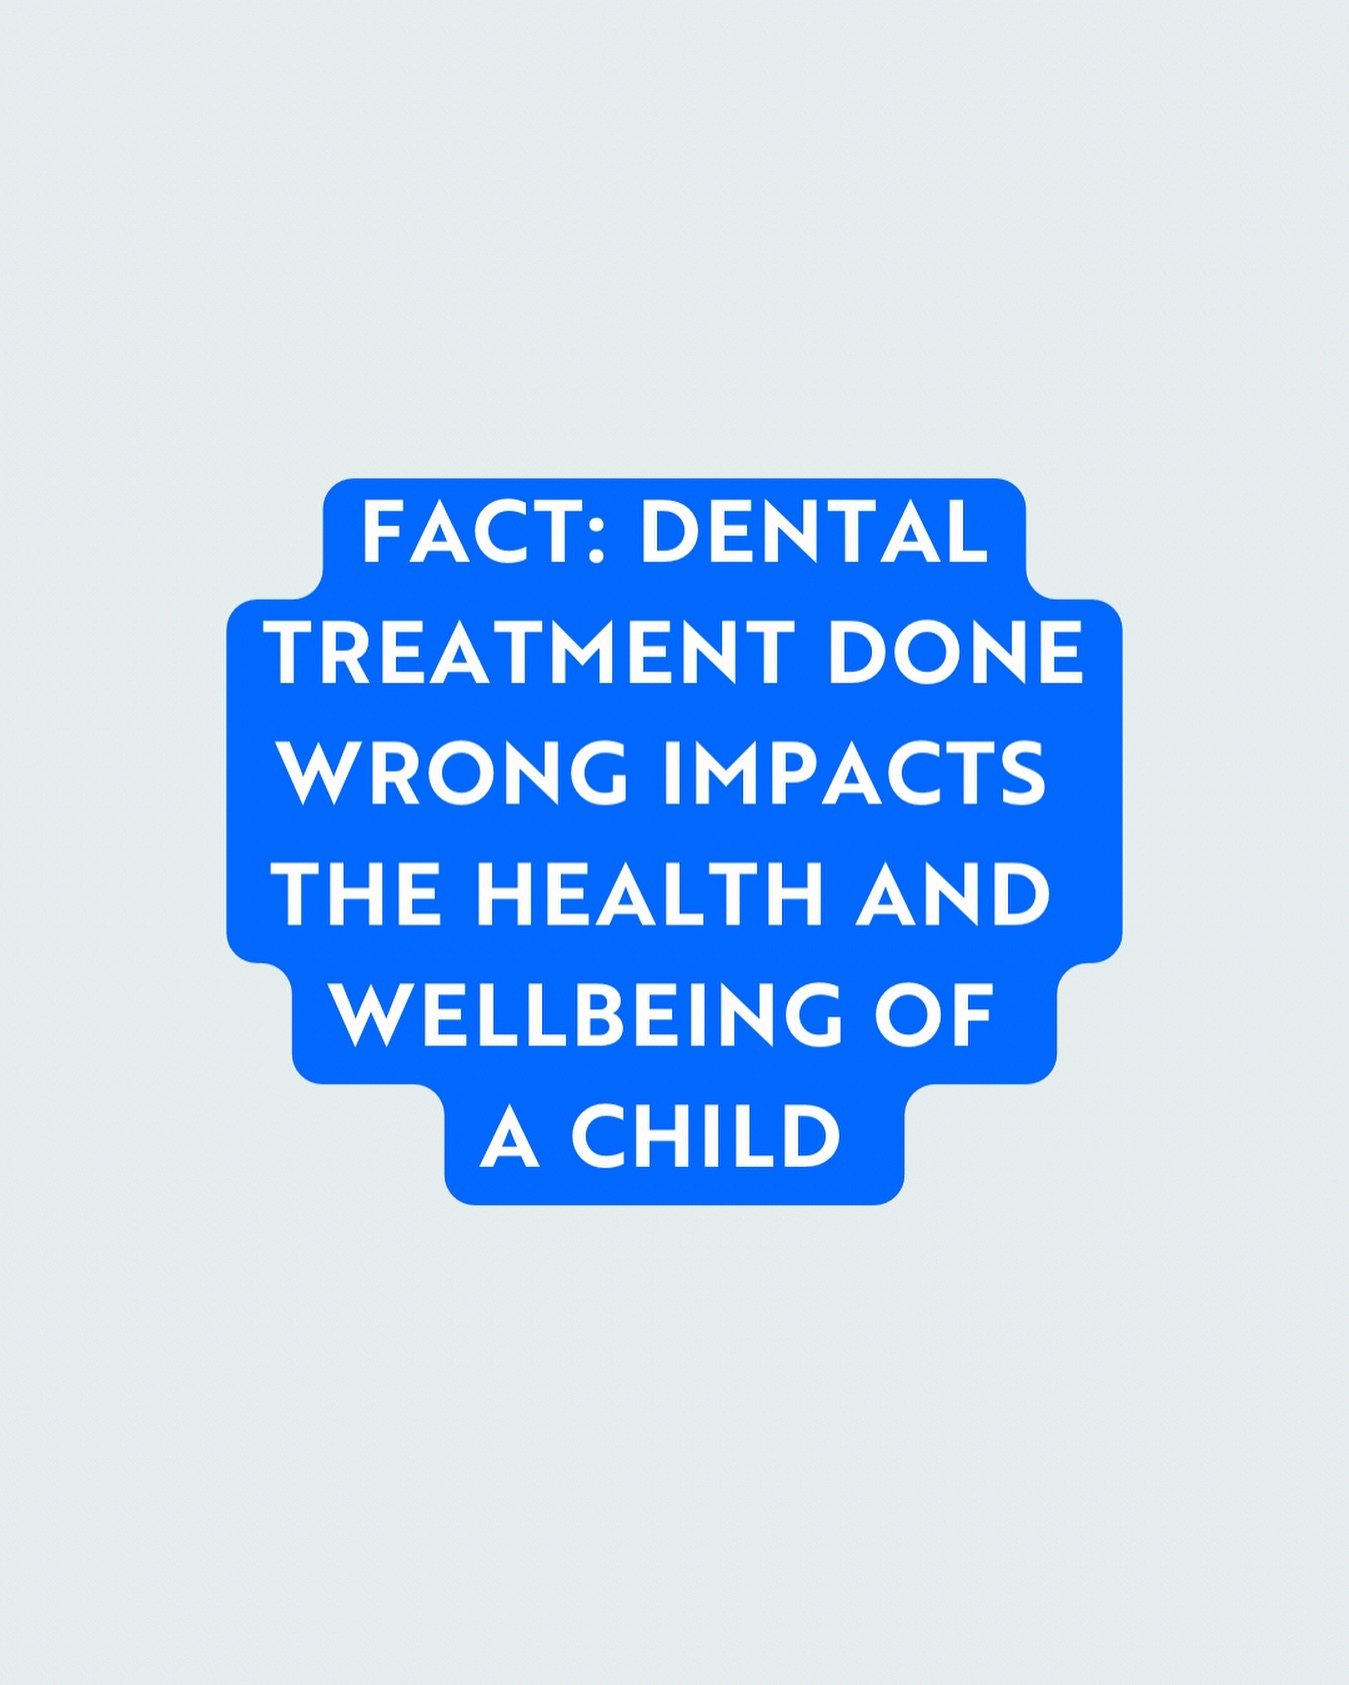 And dental treatment done right ✅ also impacts the health and wellbeing of a child.

When it comes to our kids health, most providers are focussed on the expansion of the jaws and airway, with little to no consideration of rest of the bones of the cr